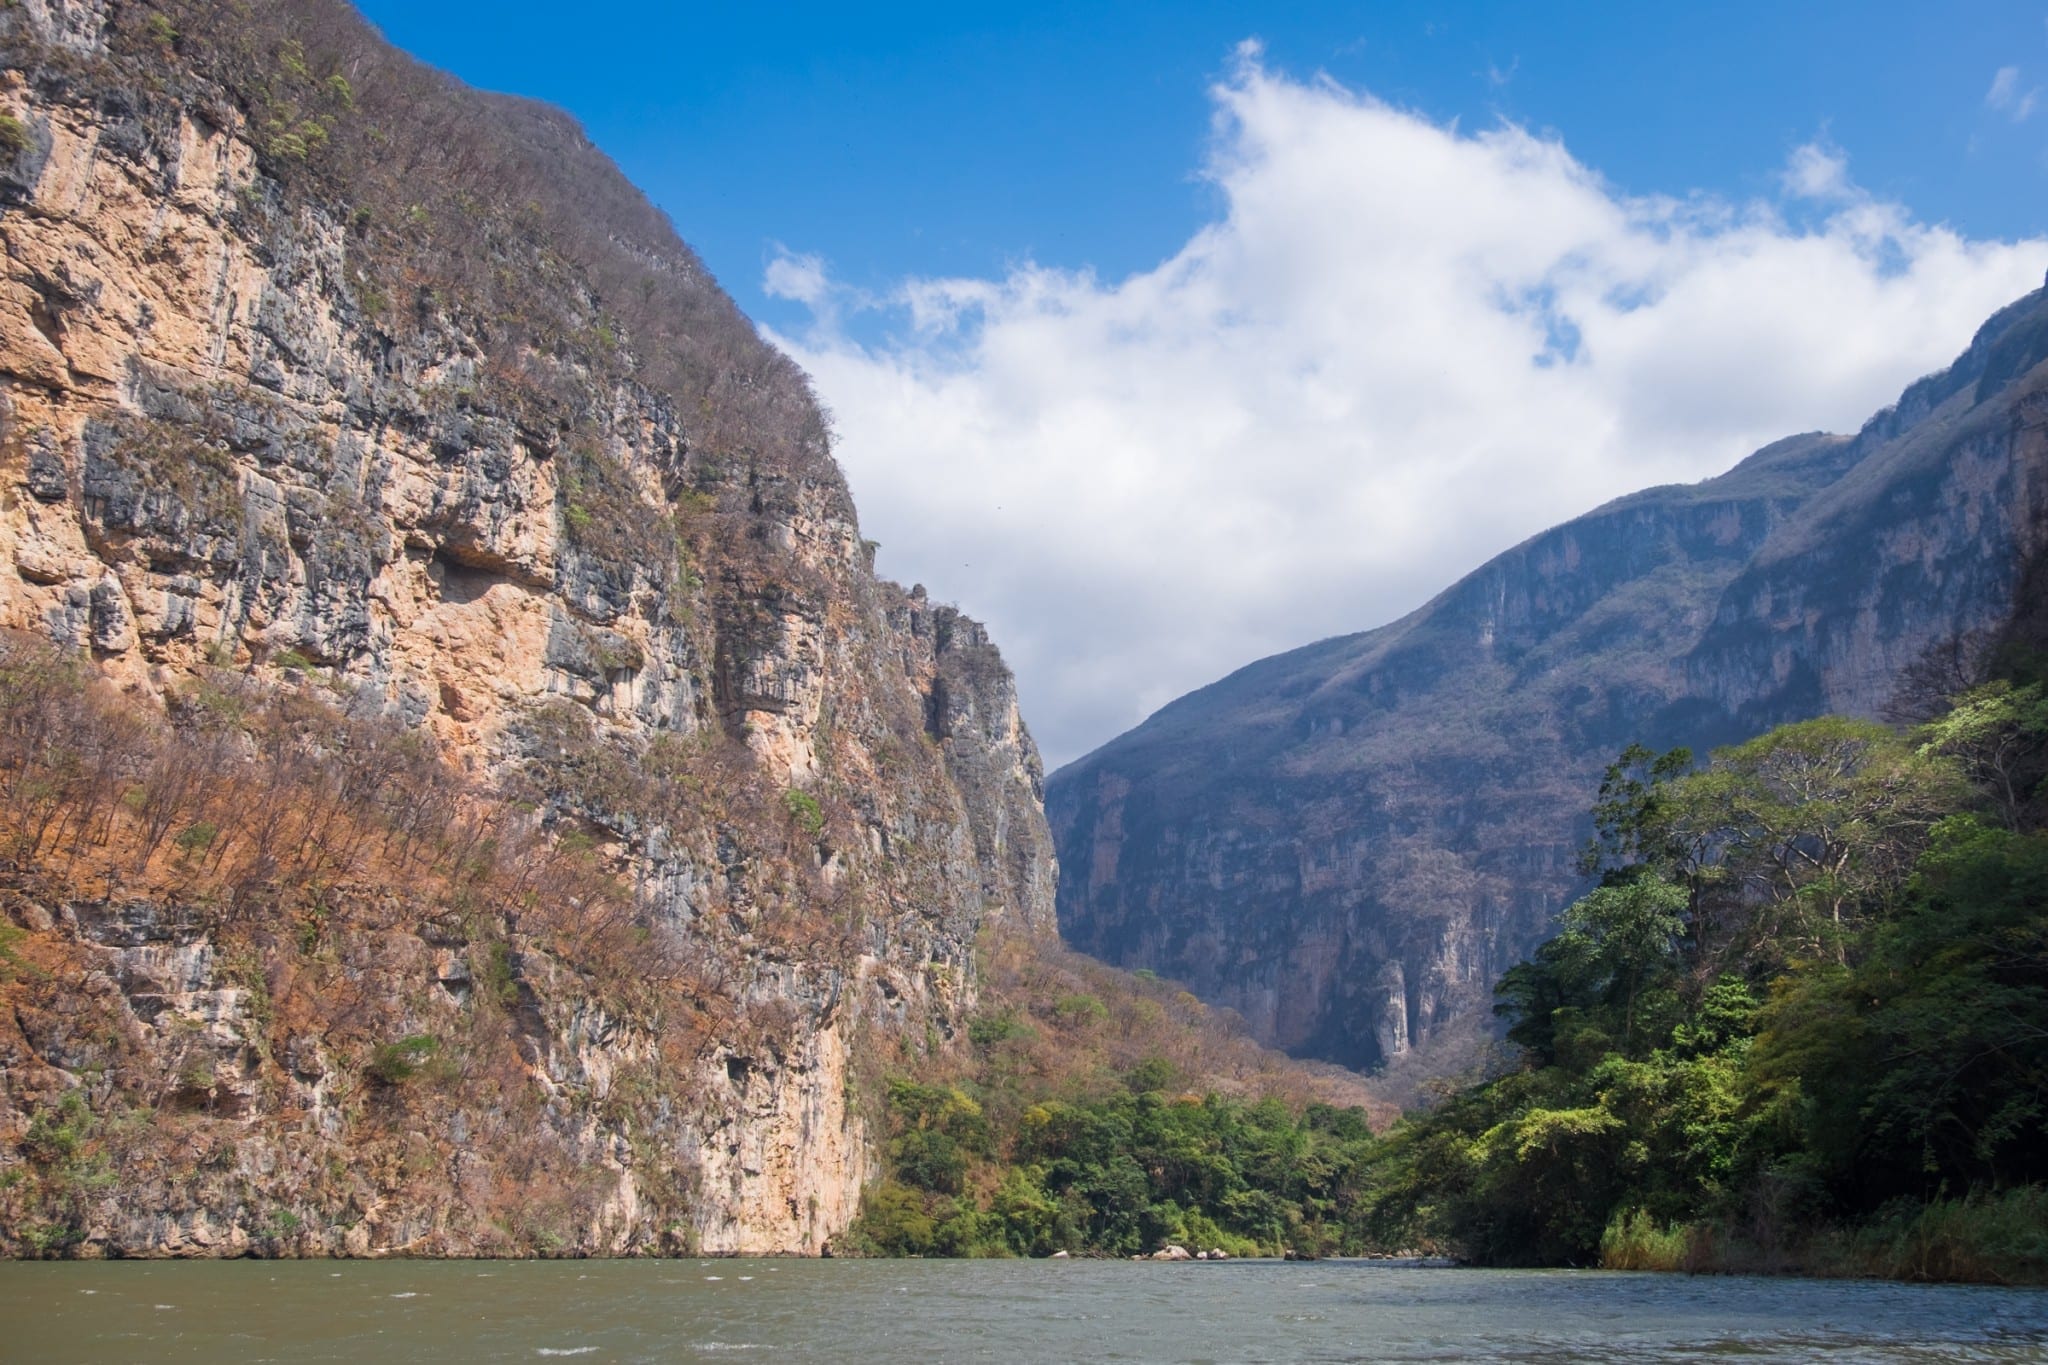 Sumidero Canyon: How to Visit from San Cristóbal